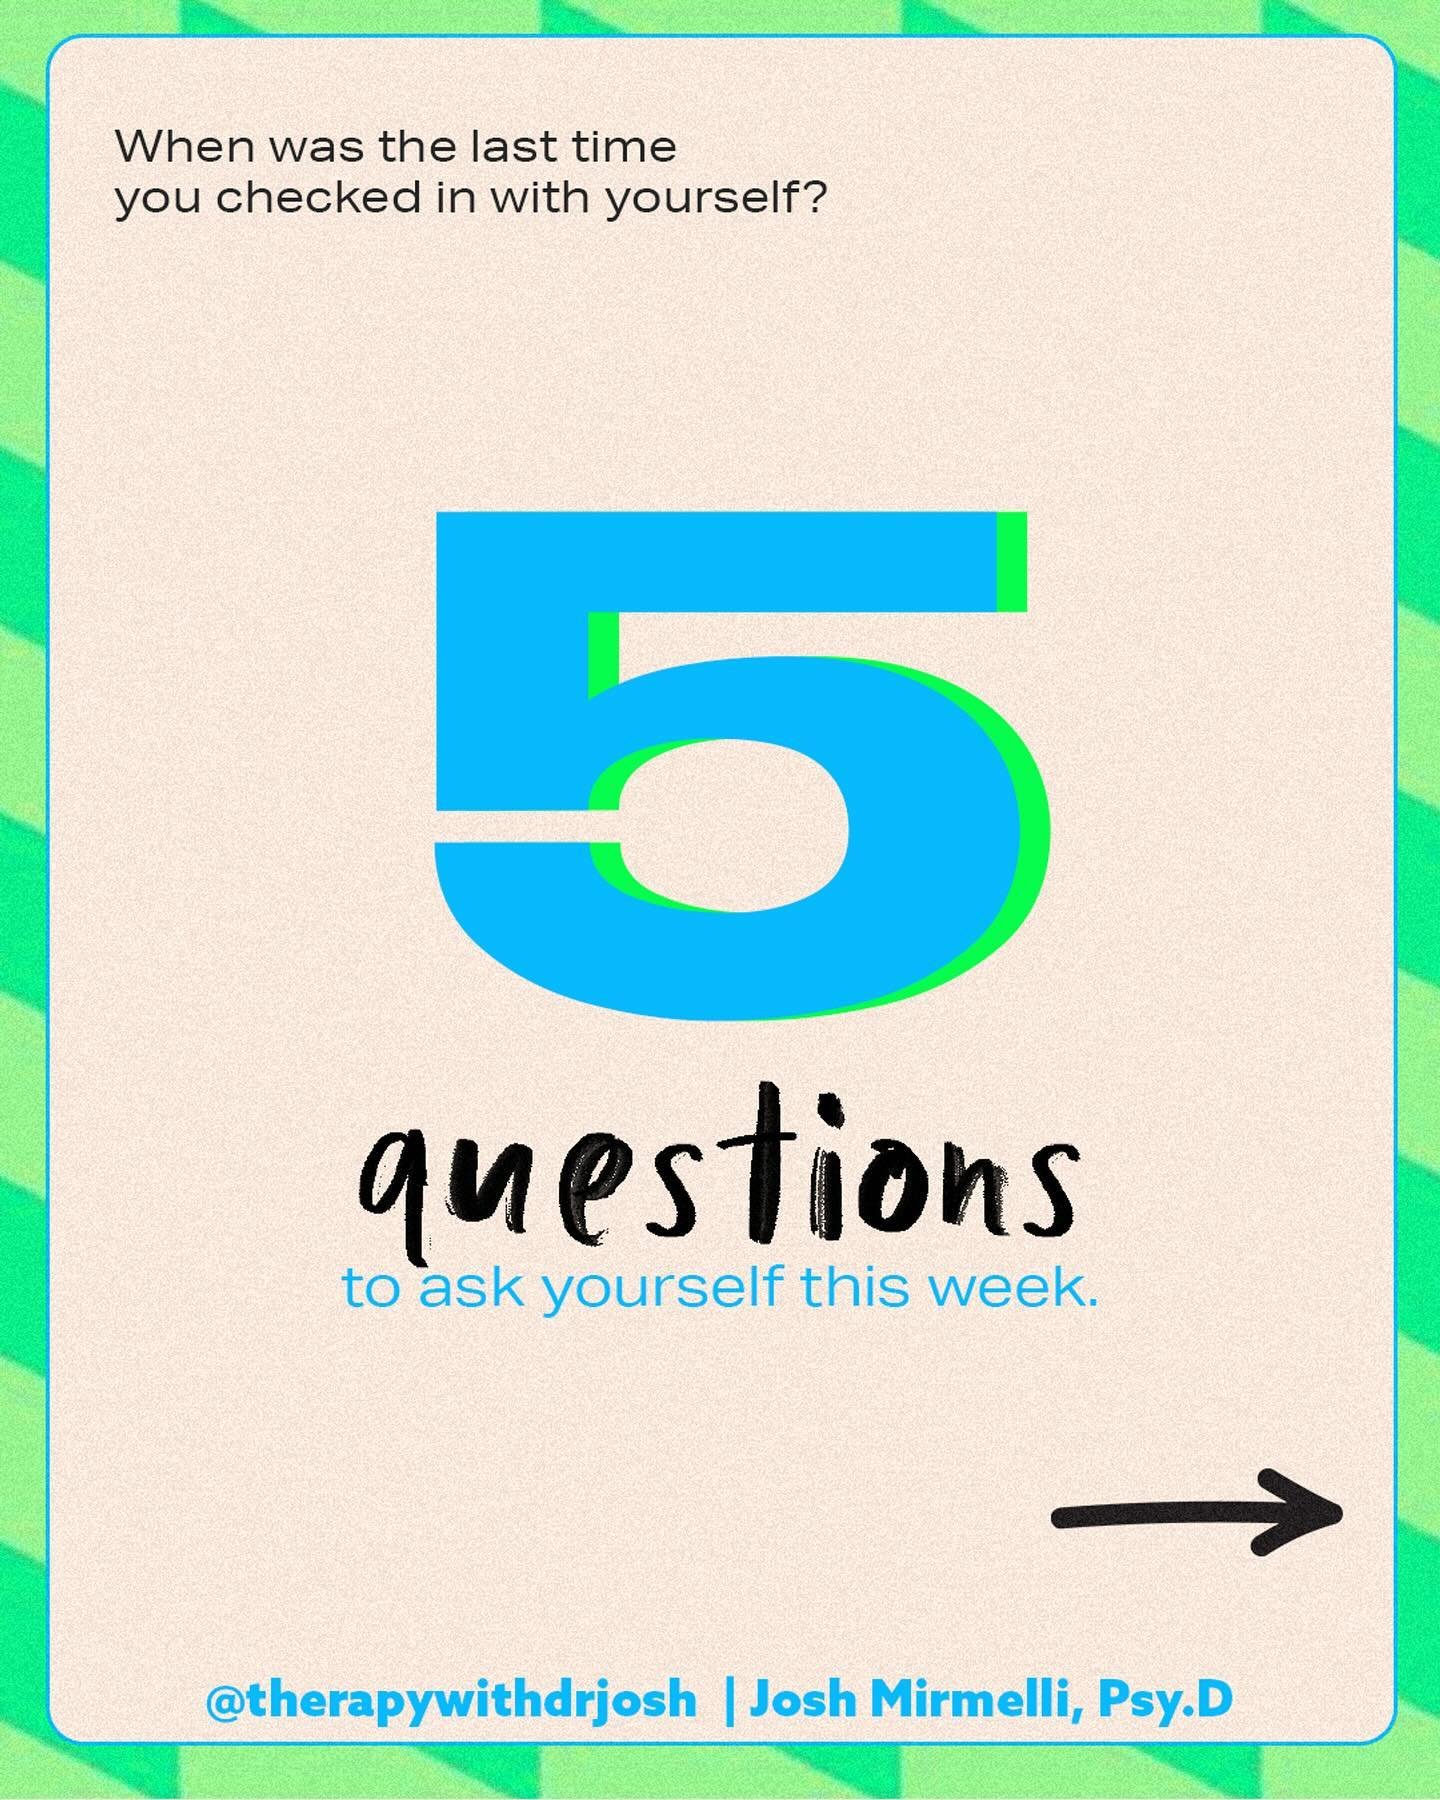 Kick off your week with purpose by reflecting on these 5 questions to help guide your decisions and actions for a productive, authentically aligned week. 📝💭 

1. Self-Discovery: What recent insights about yourself can you use to enhance this week? 